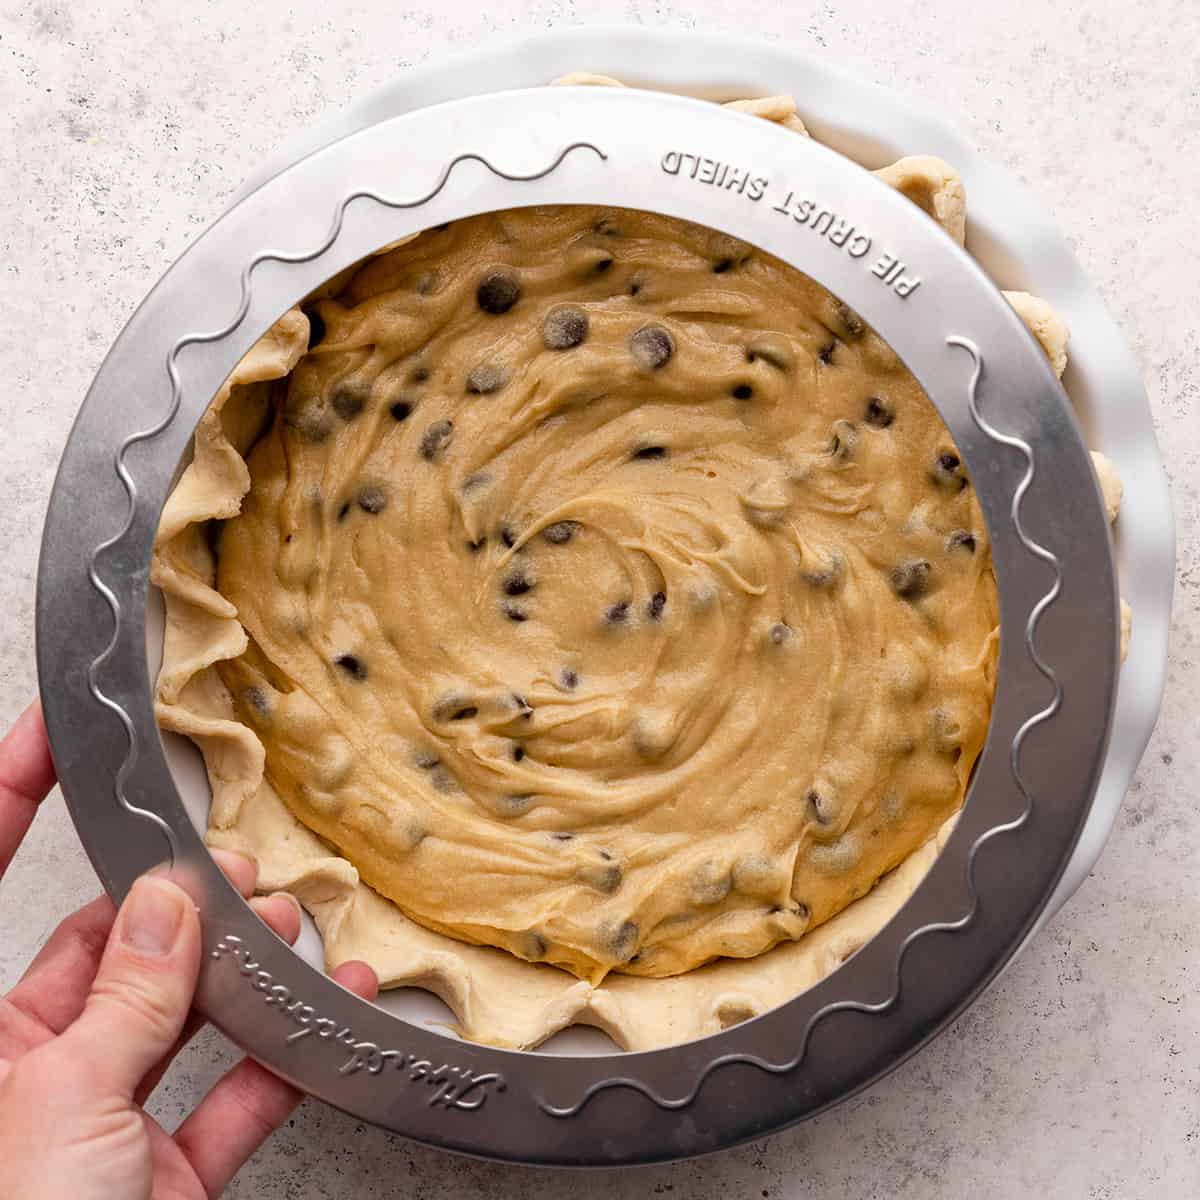 a pie crust shield being put over chocolate chip cookie pie in a pie dish before baking